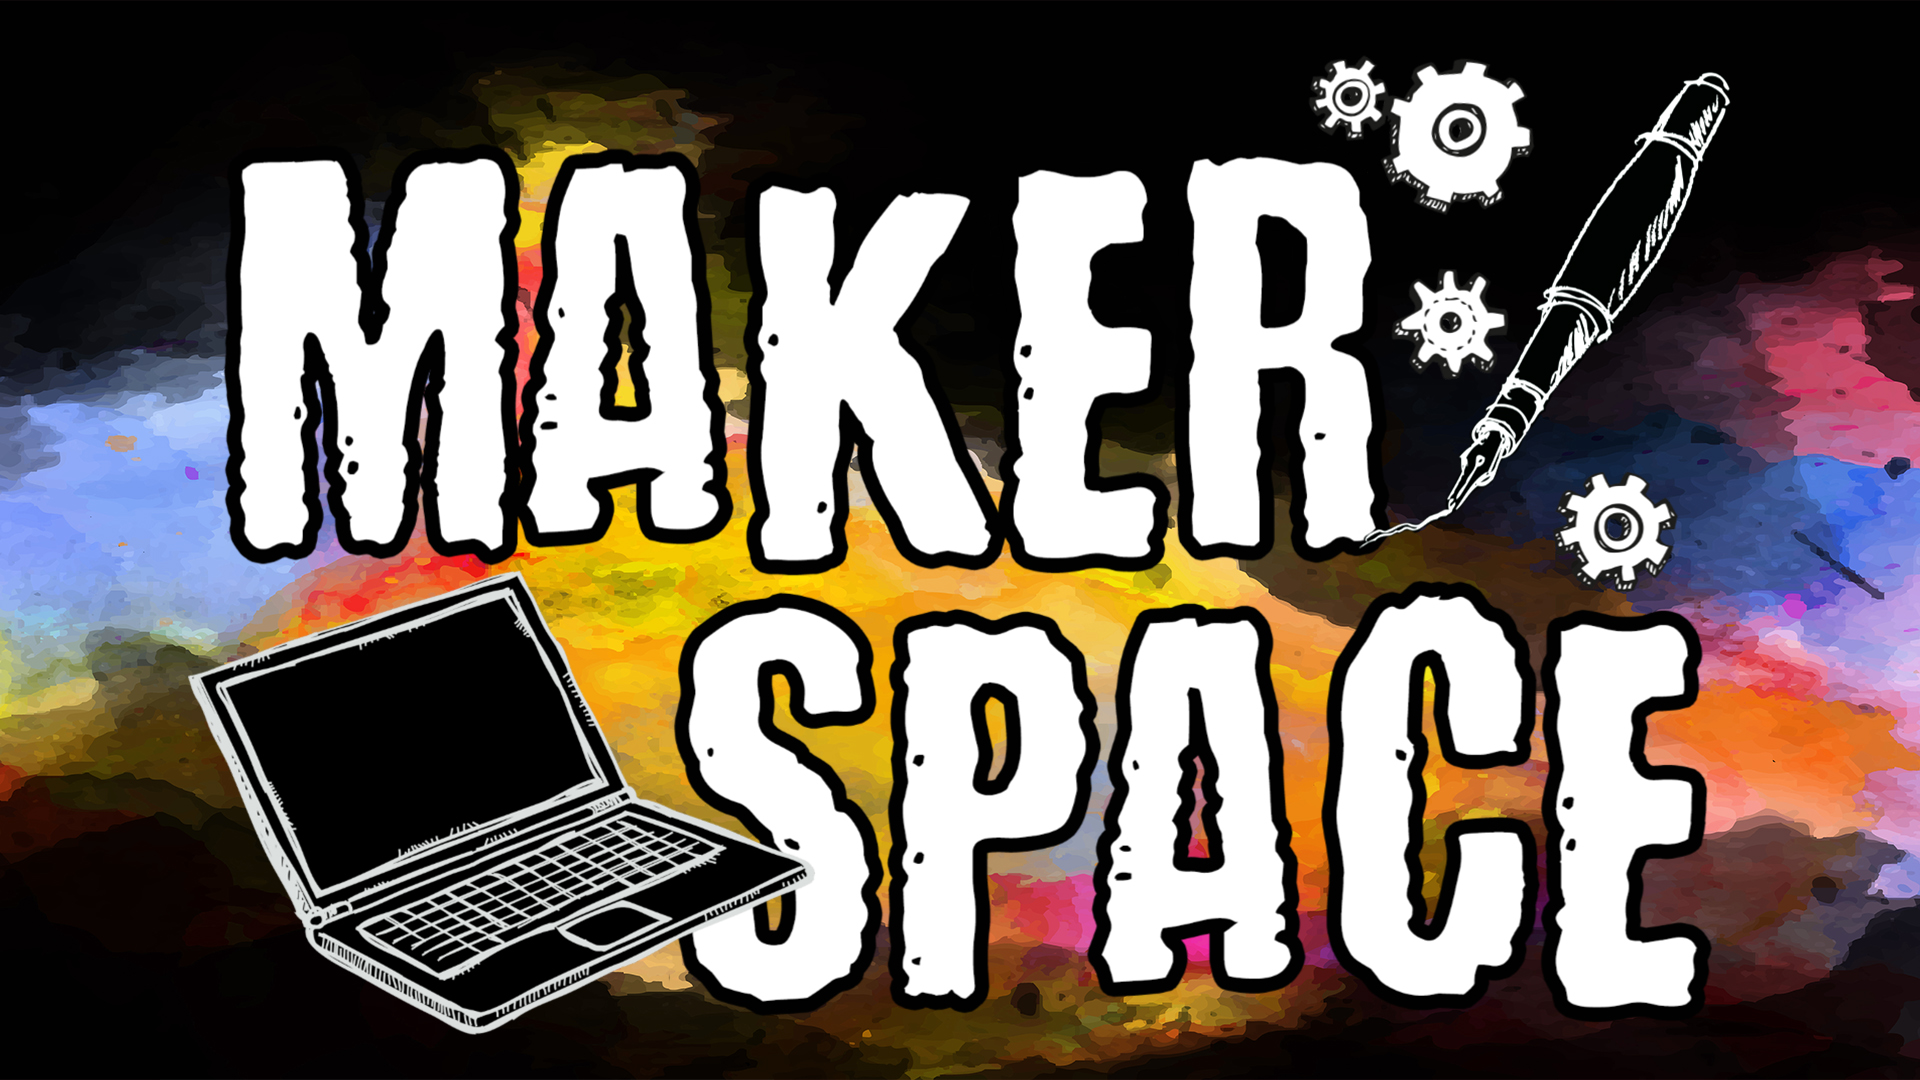 Image reads "Makerspace" against a galaxy background. A laptop is in the bottom left corner and a pen and gears are in the top right corner. 